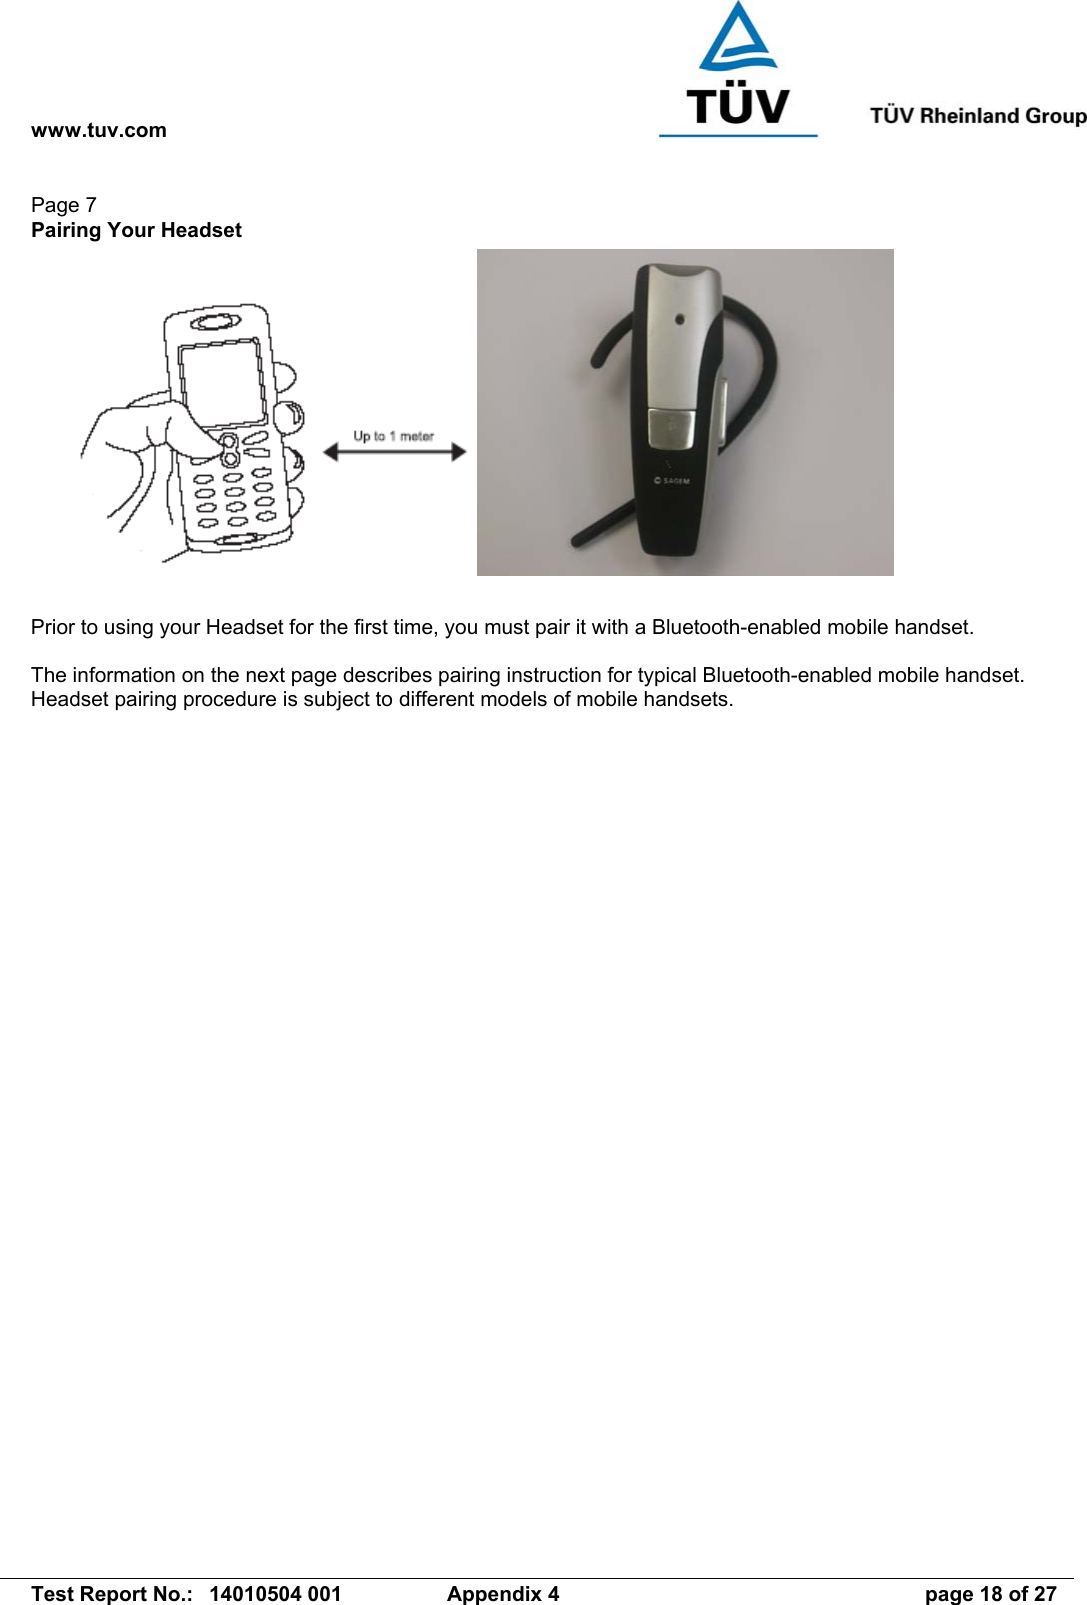 www.tuv.com   Test Report No.:  14010504 001  Appendix 4  page 18 of 27 Page 7 Pairing Your Headset    Prior to using your Headset for the first time, you must pair it with a Bluetooth-enabled mobile handset.    The information on the next page describes pairing instruction for typical Bluetooth-enabled mobile handset. Headset pairing procedure is subject to different models of mobile handsets.  